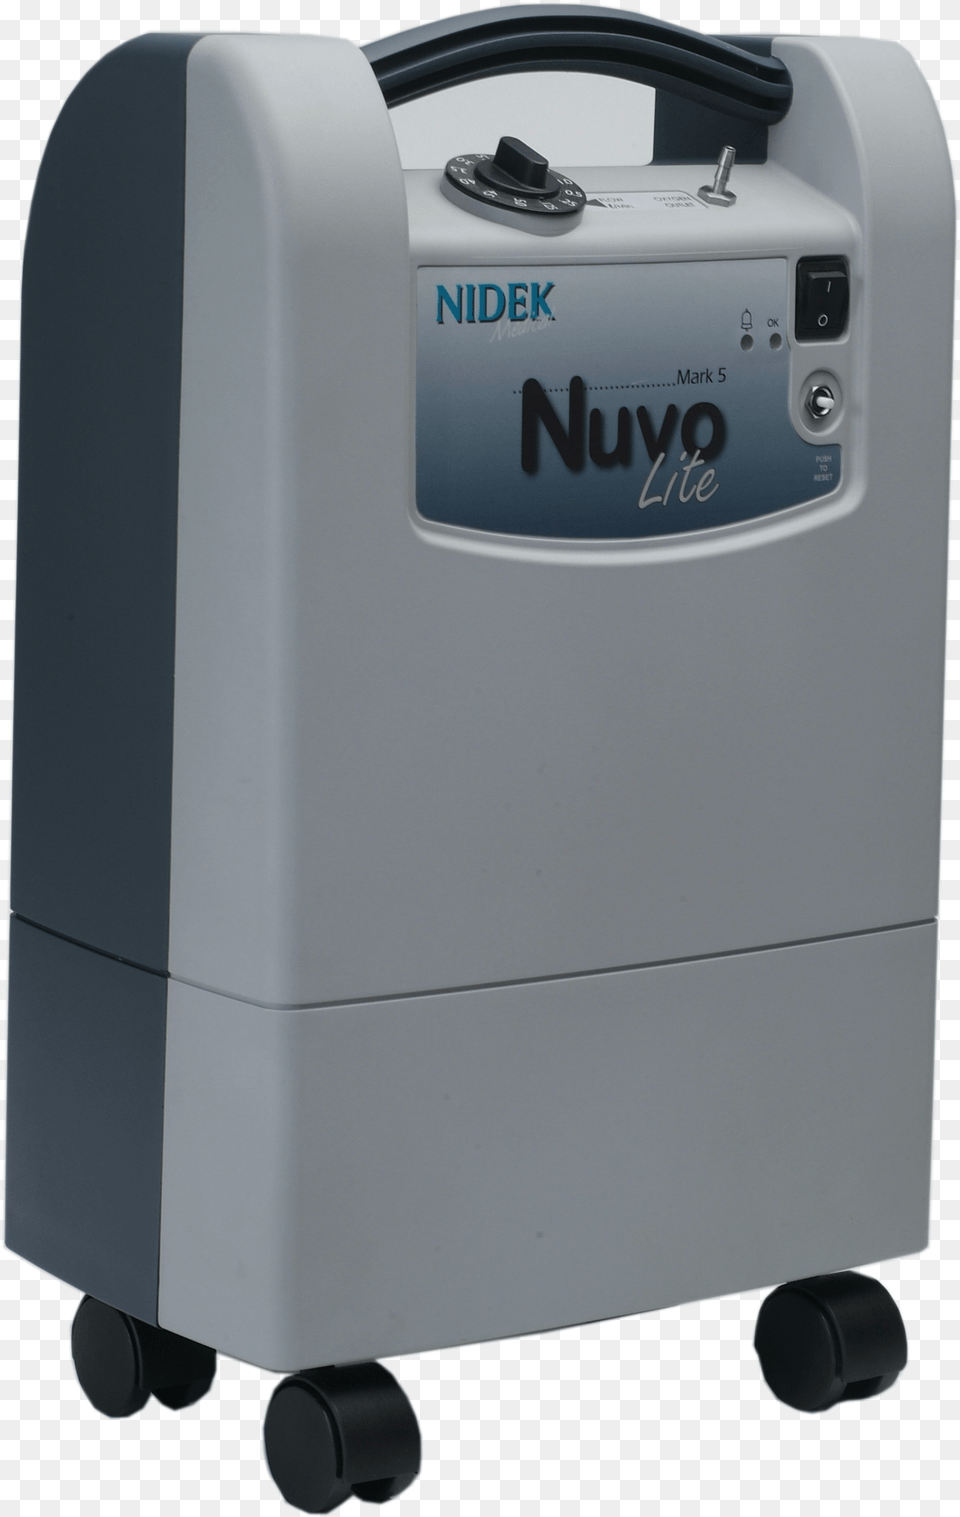 Nidek Nuvo Lite Oxygen Concentrator, Mailbox, Device, Machine, Appliance Png